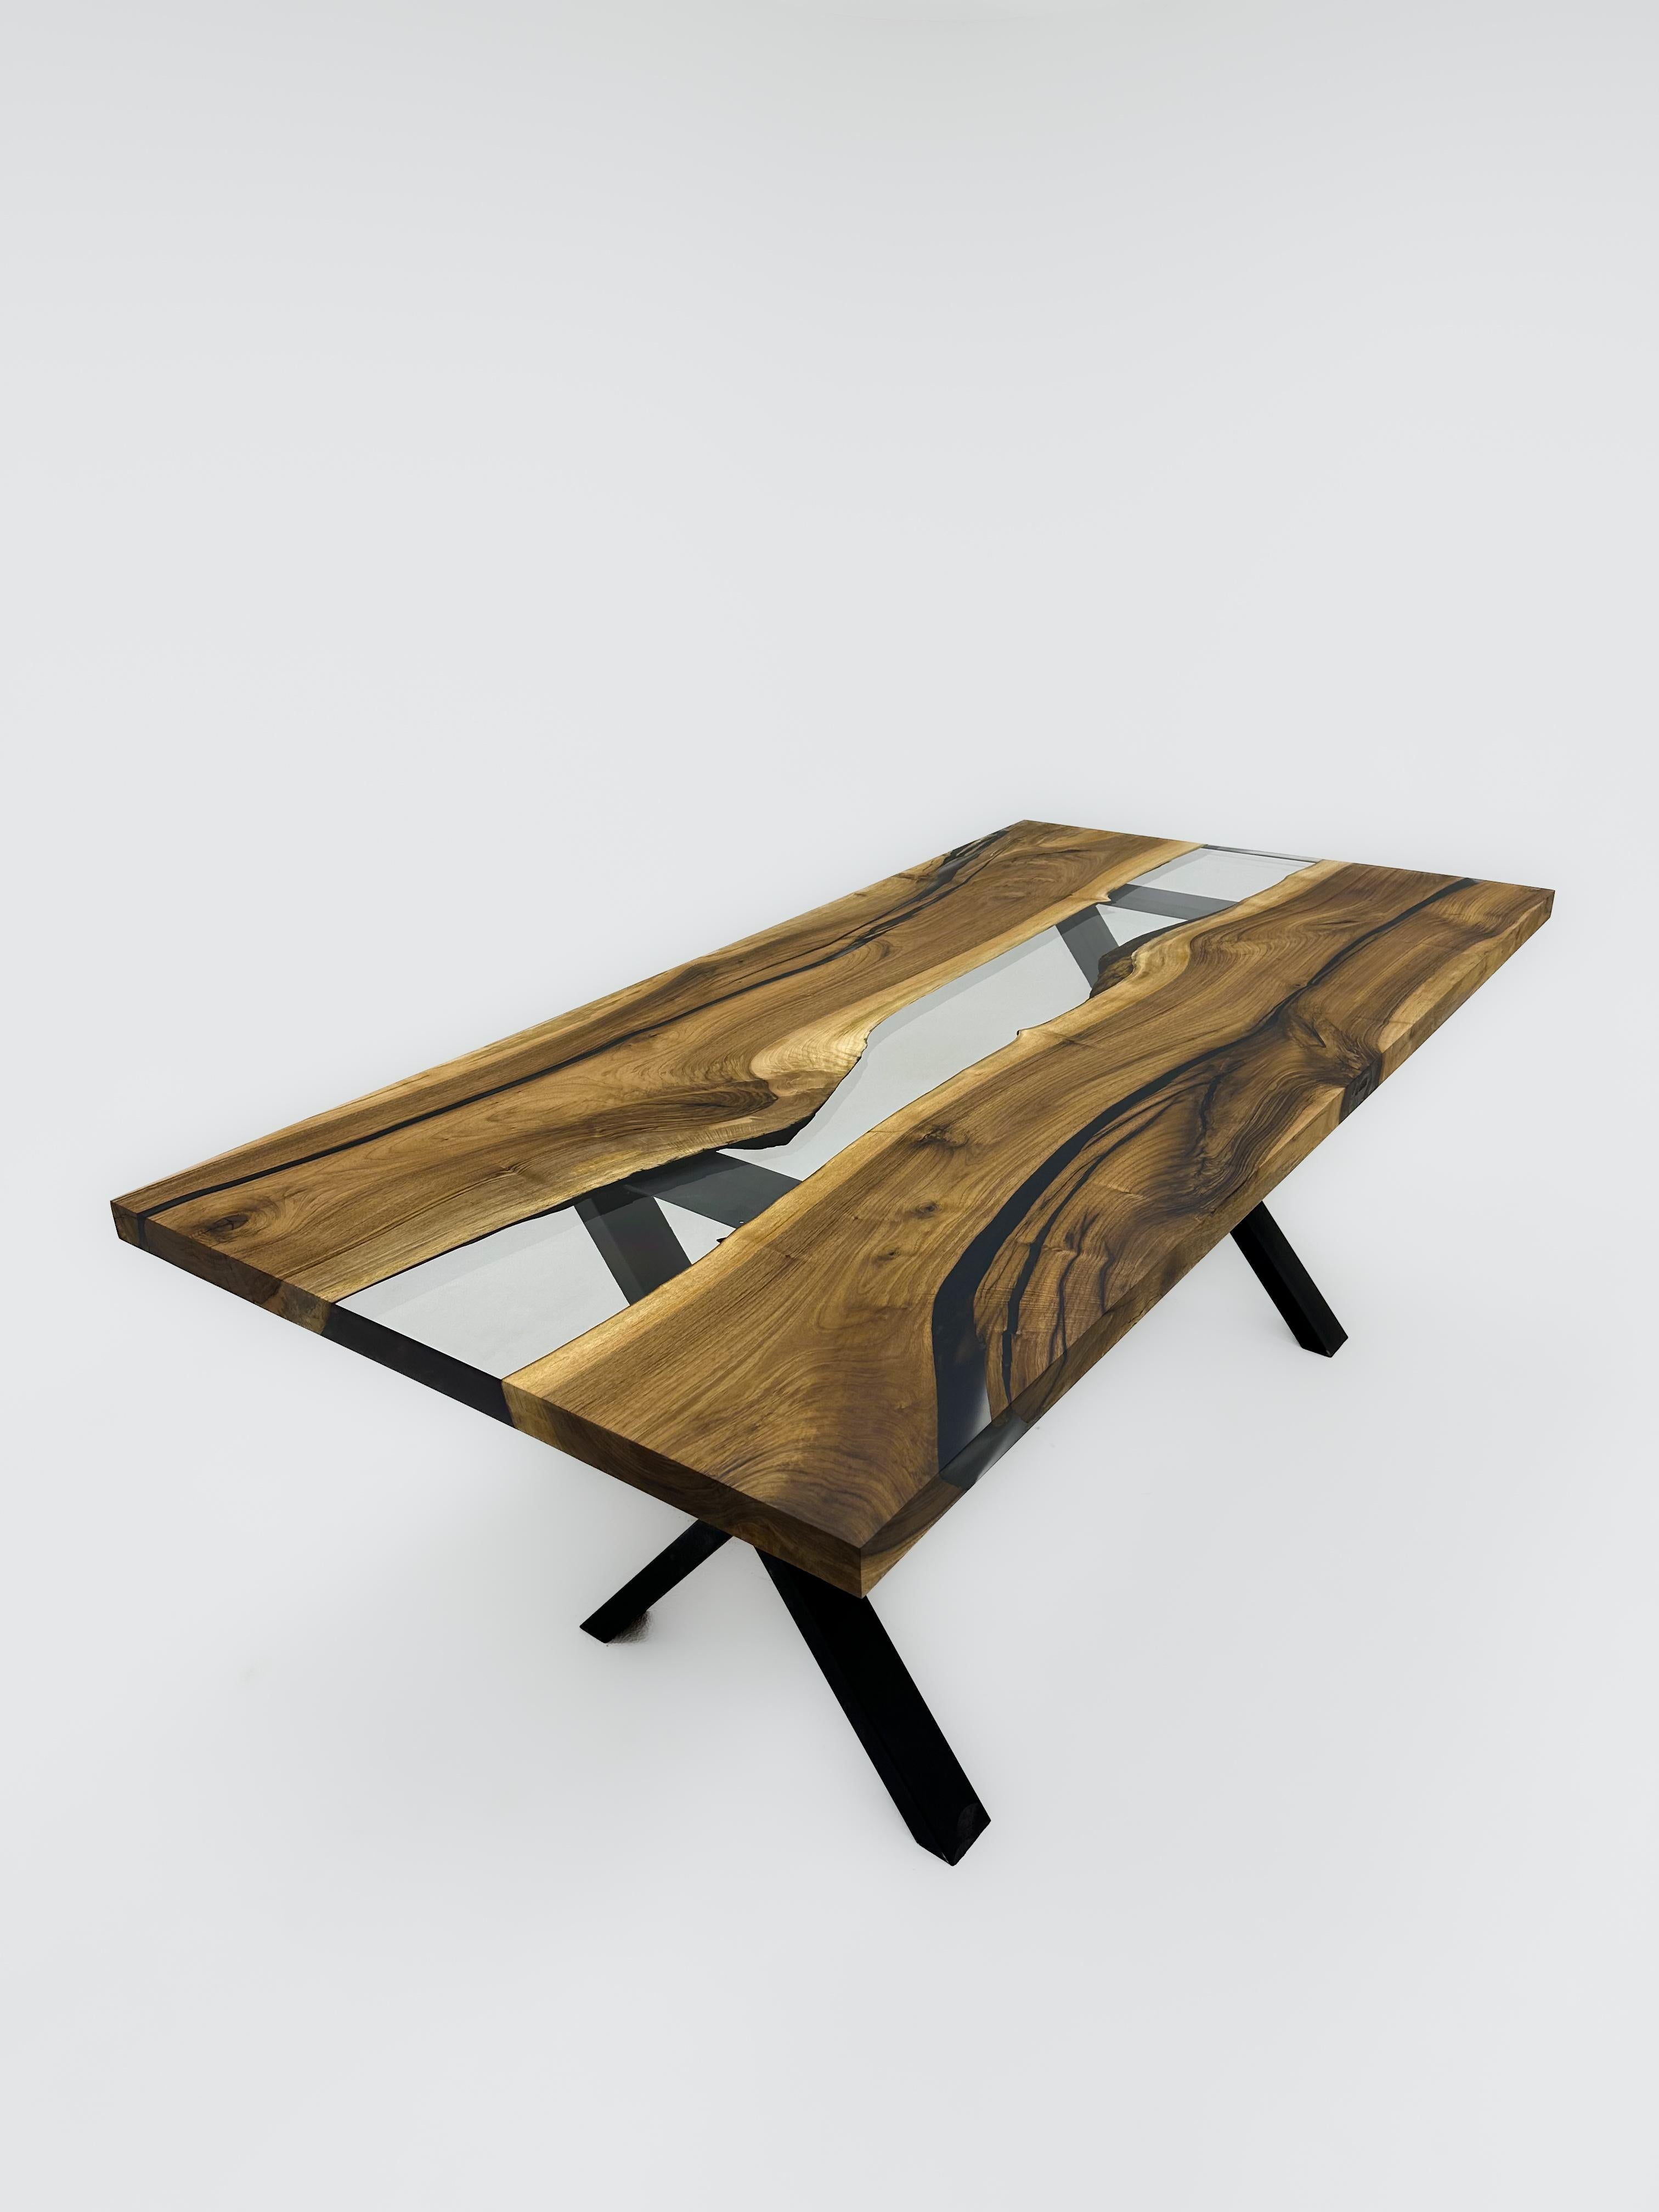 Turkish Walnut Clear Epoxy Resin Wooden Live Edge Dining Table For Sale